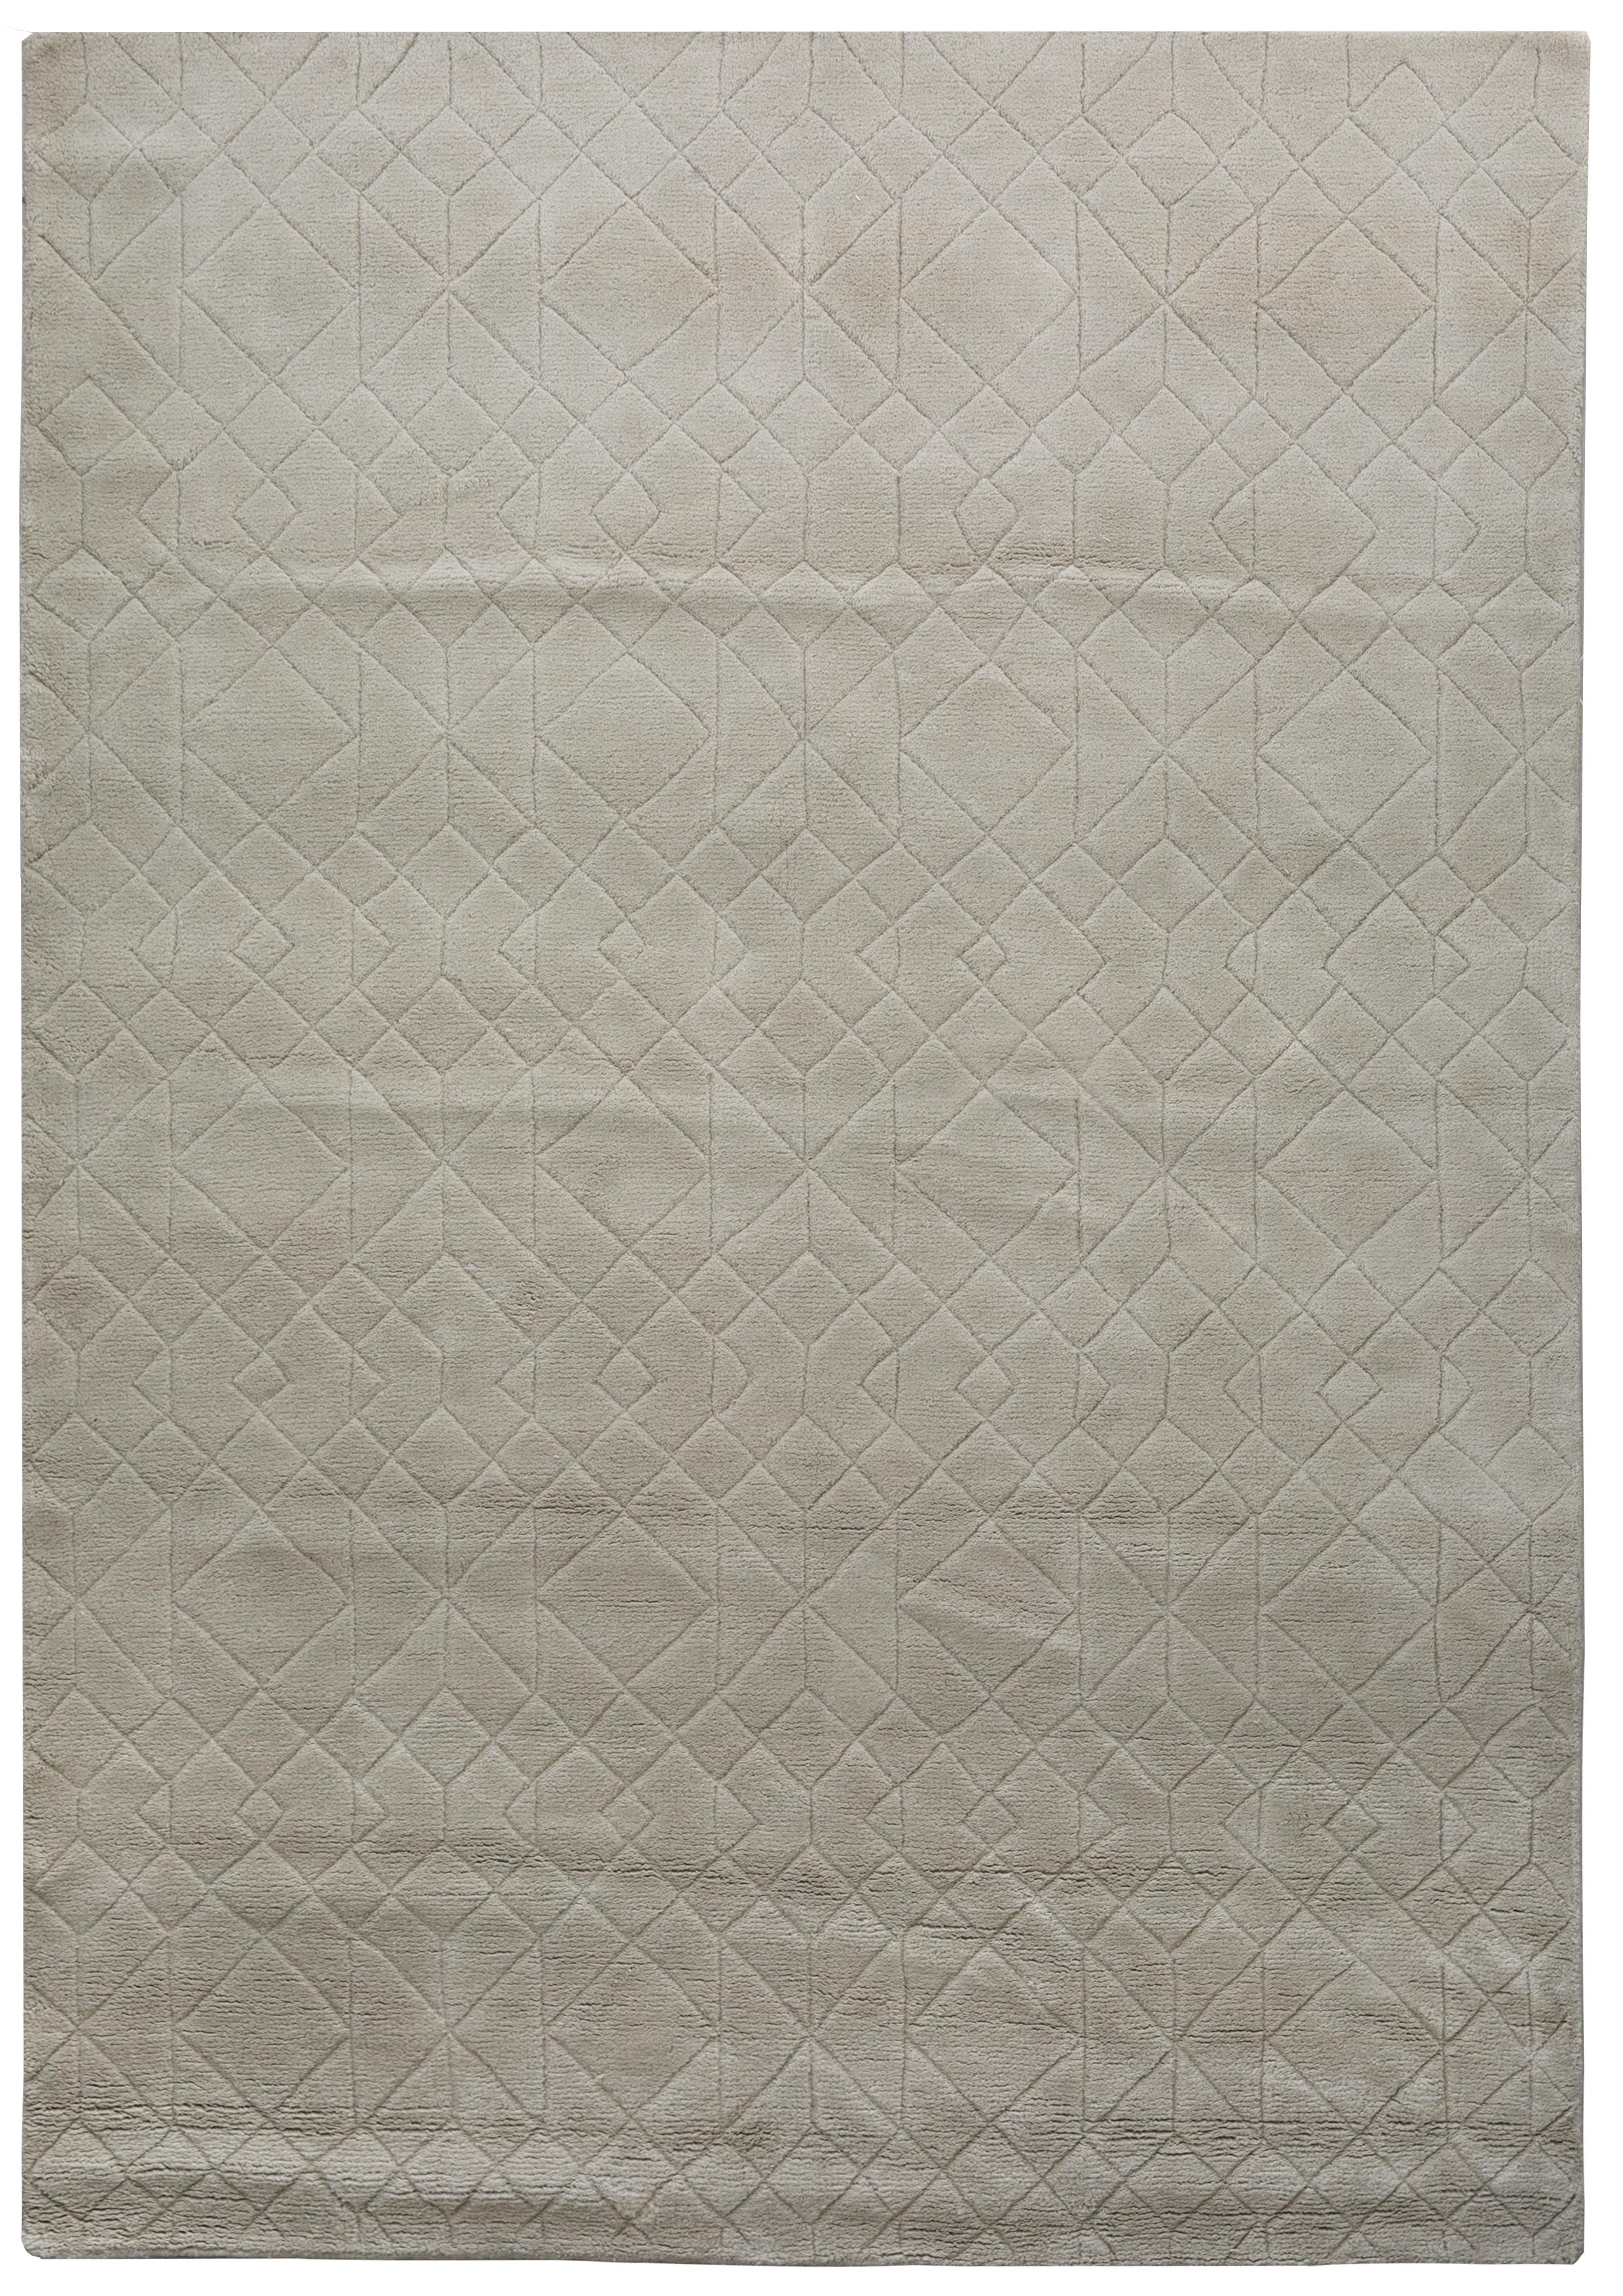 Art Deco Soft and Sophisticated Customizable Stardust Weave Rug in Dove Large